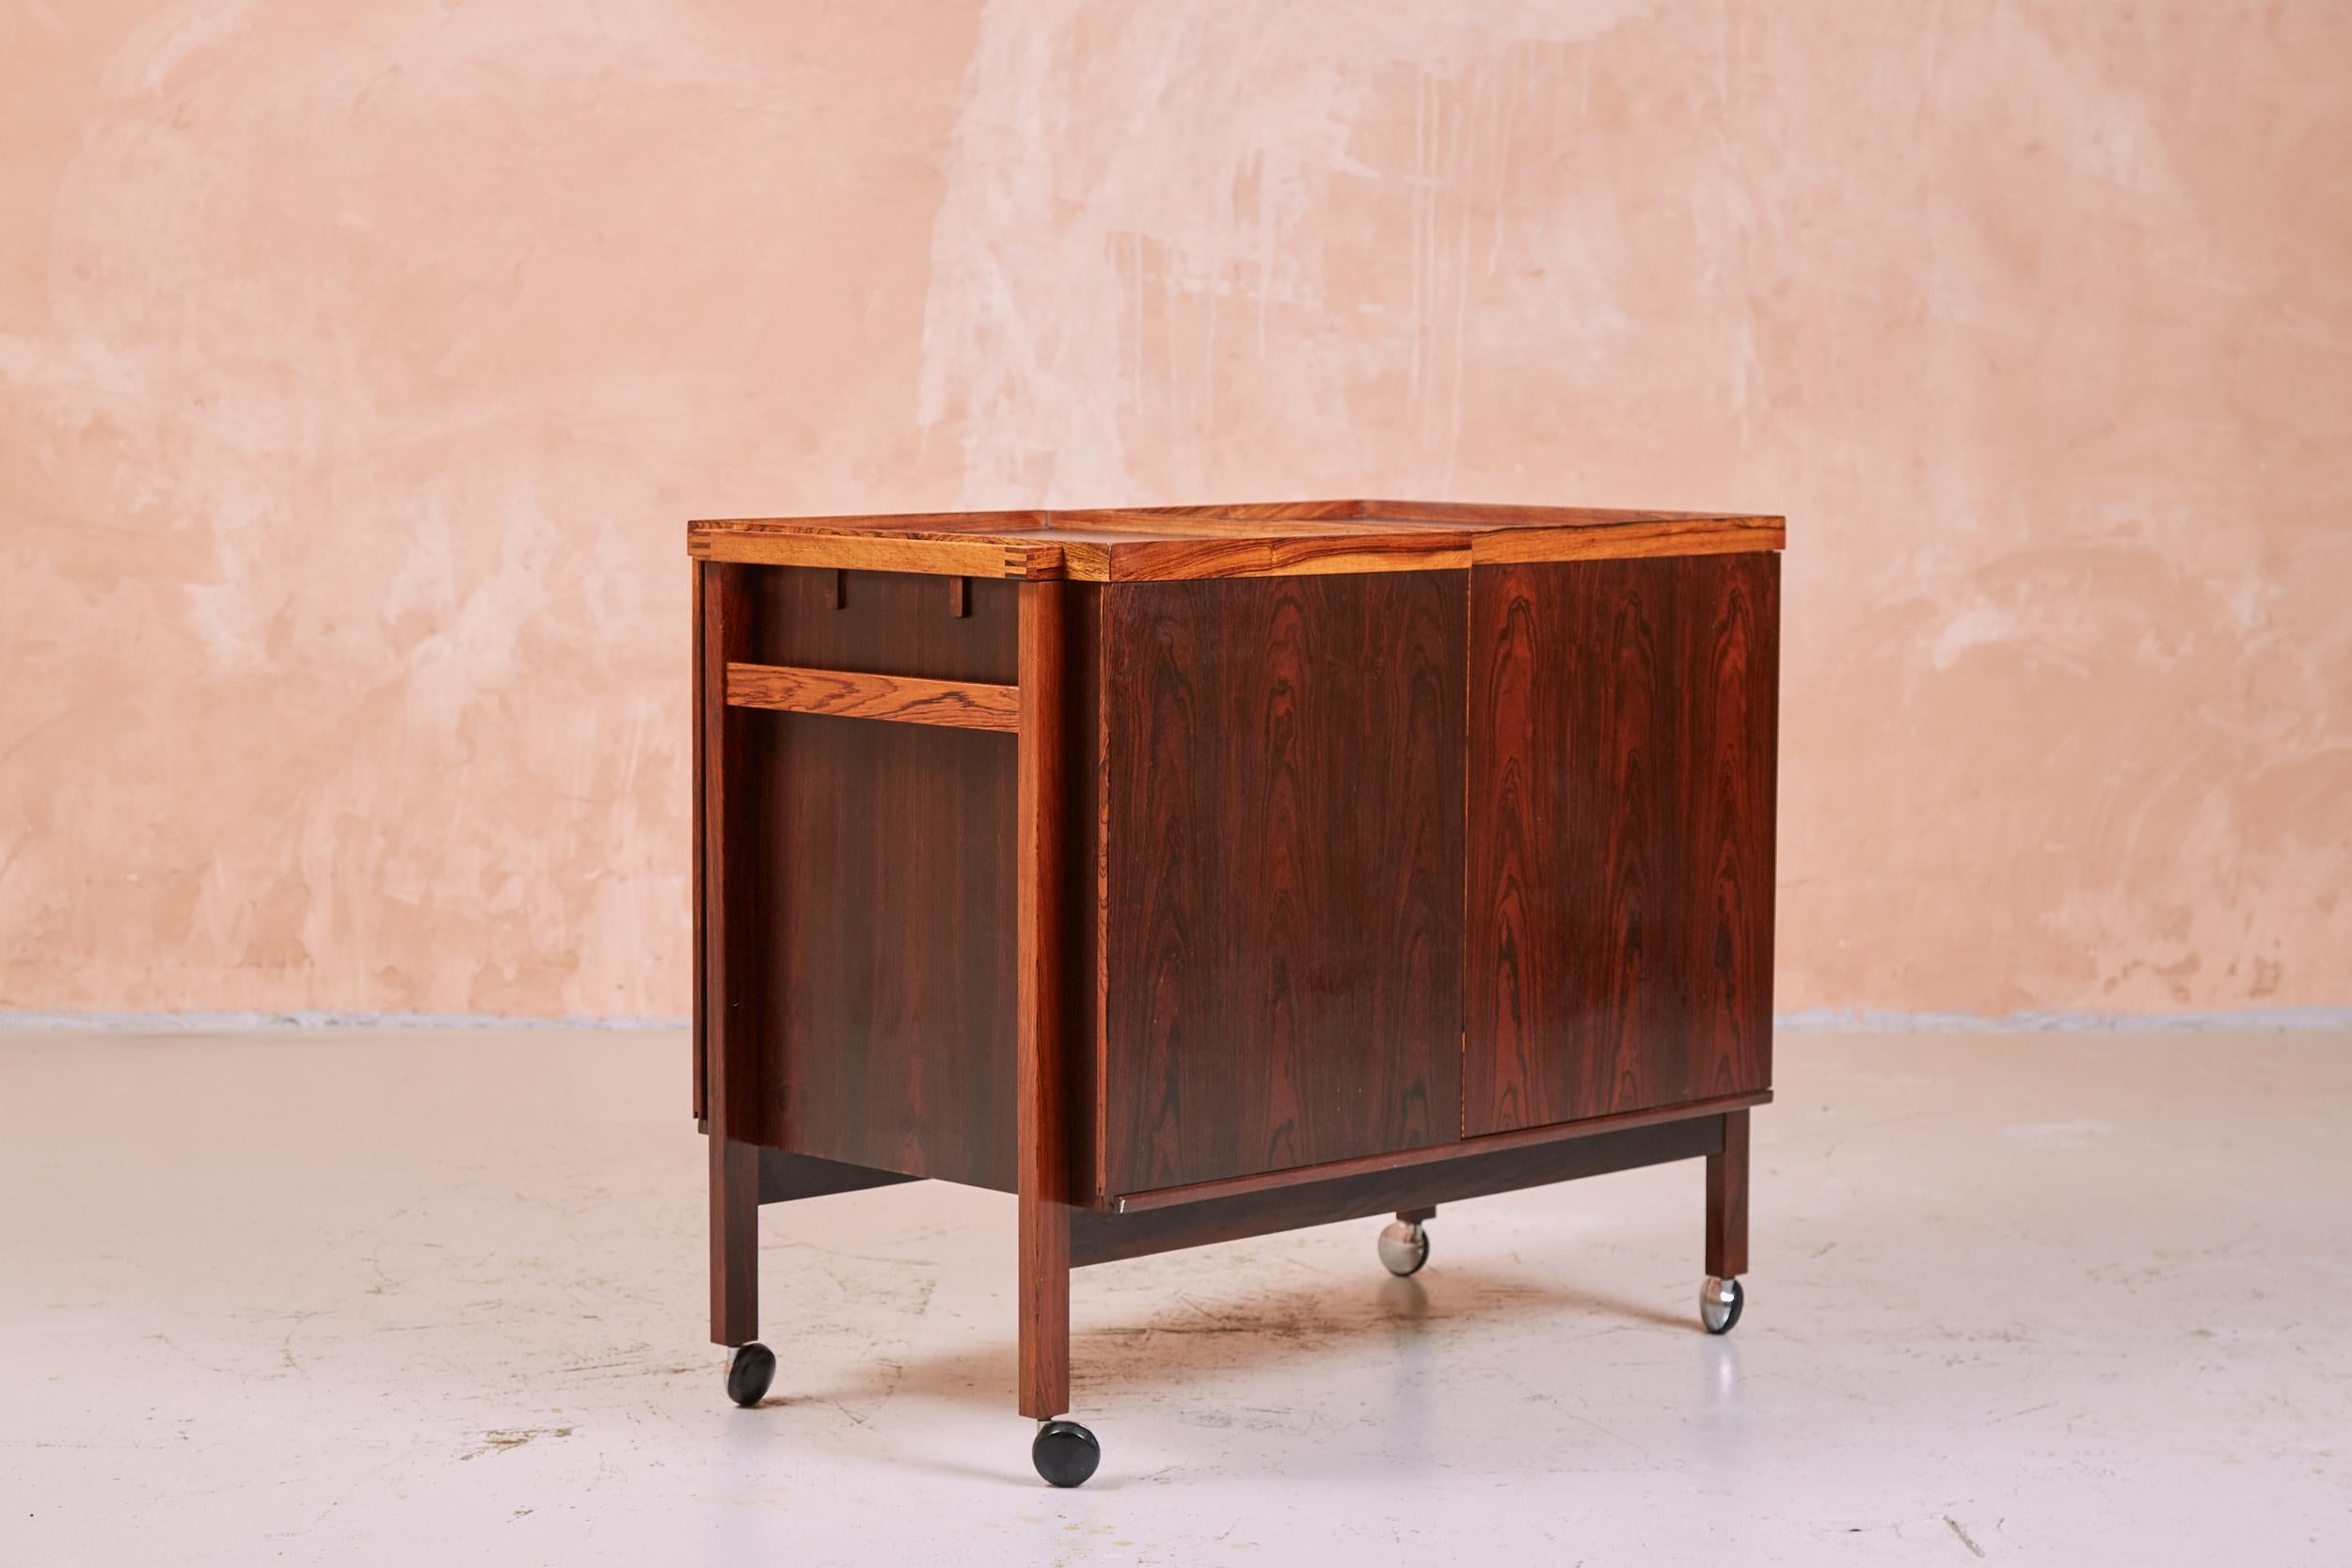 This gorgeous example of an iconic Danish designed bar cart has amazing rosewood grain which makes it a standout.
A piece of functional art furniture designed by Niels Erik and Glasdam Jensen for Vantinge Møbelindustri, dating from 1964. Opens with